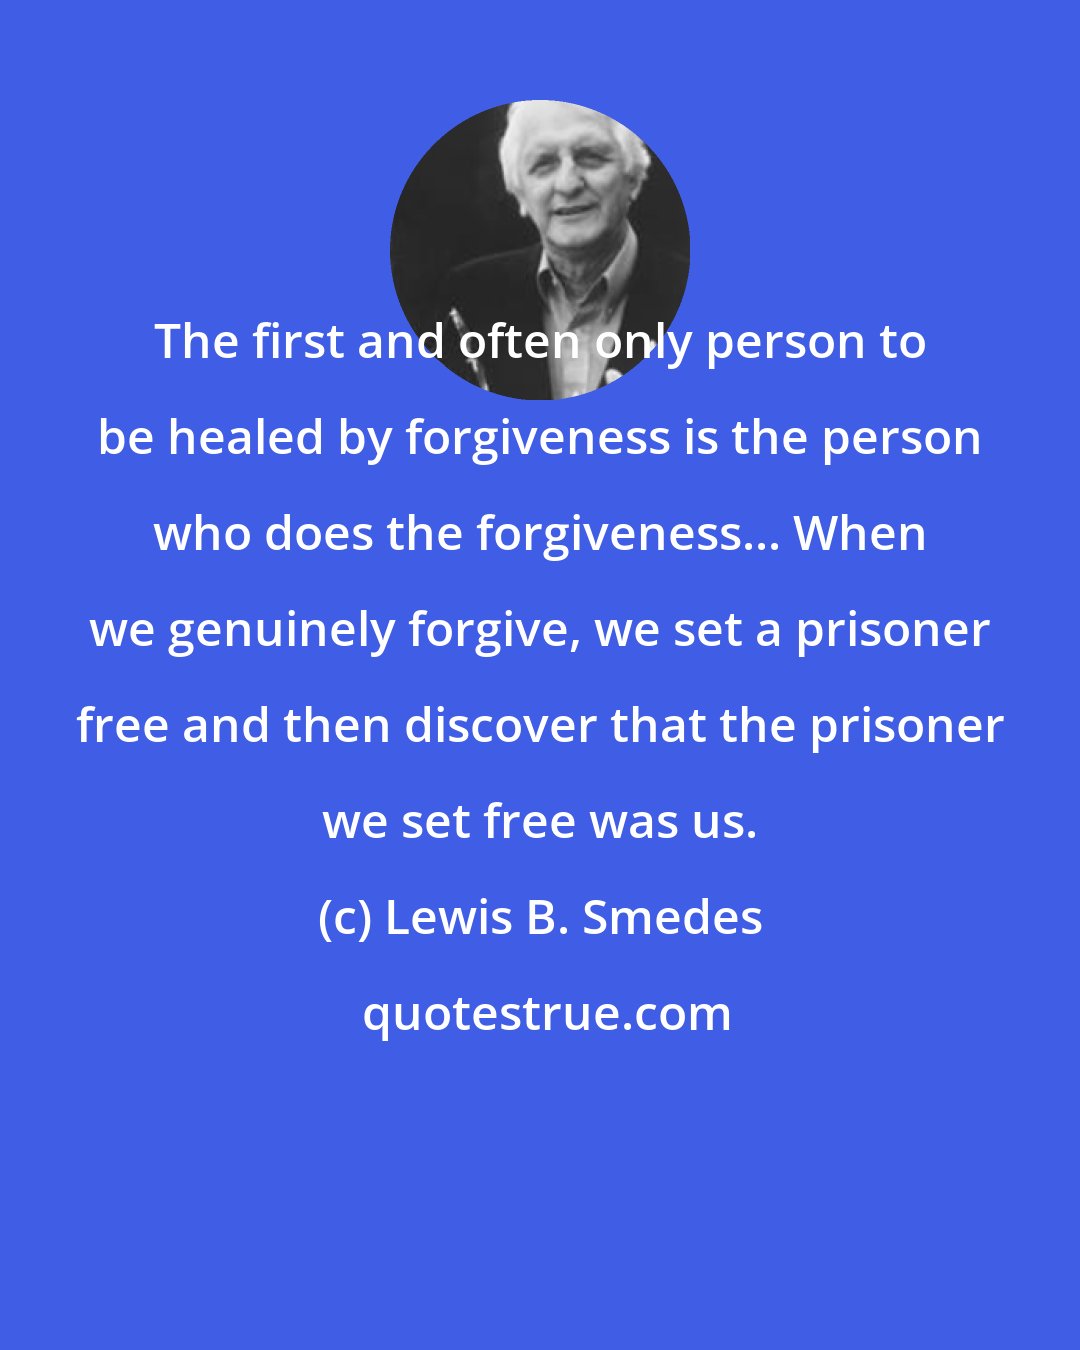 Lewis B. Smedes: The first and often only person to be healed by forgiveness is the person who does the forgiveness... When we genuinely forgive, we set a prisoner free and then discover that the prisoner we set free was us.